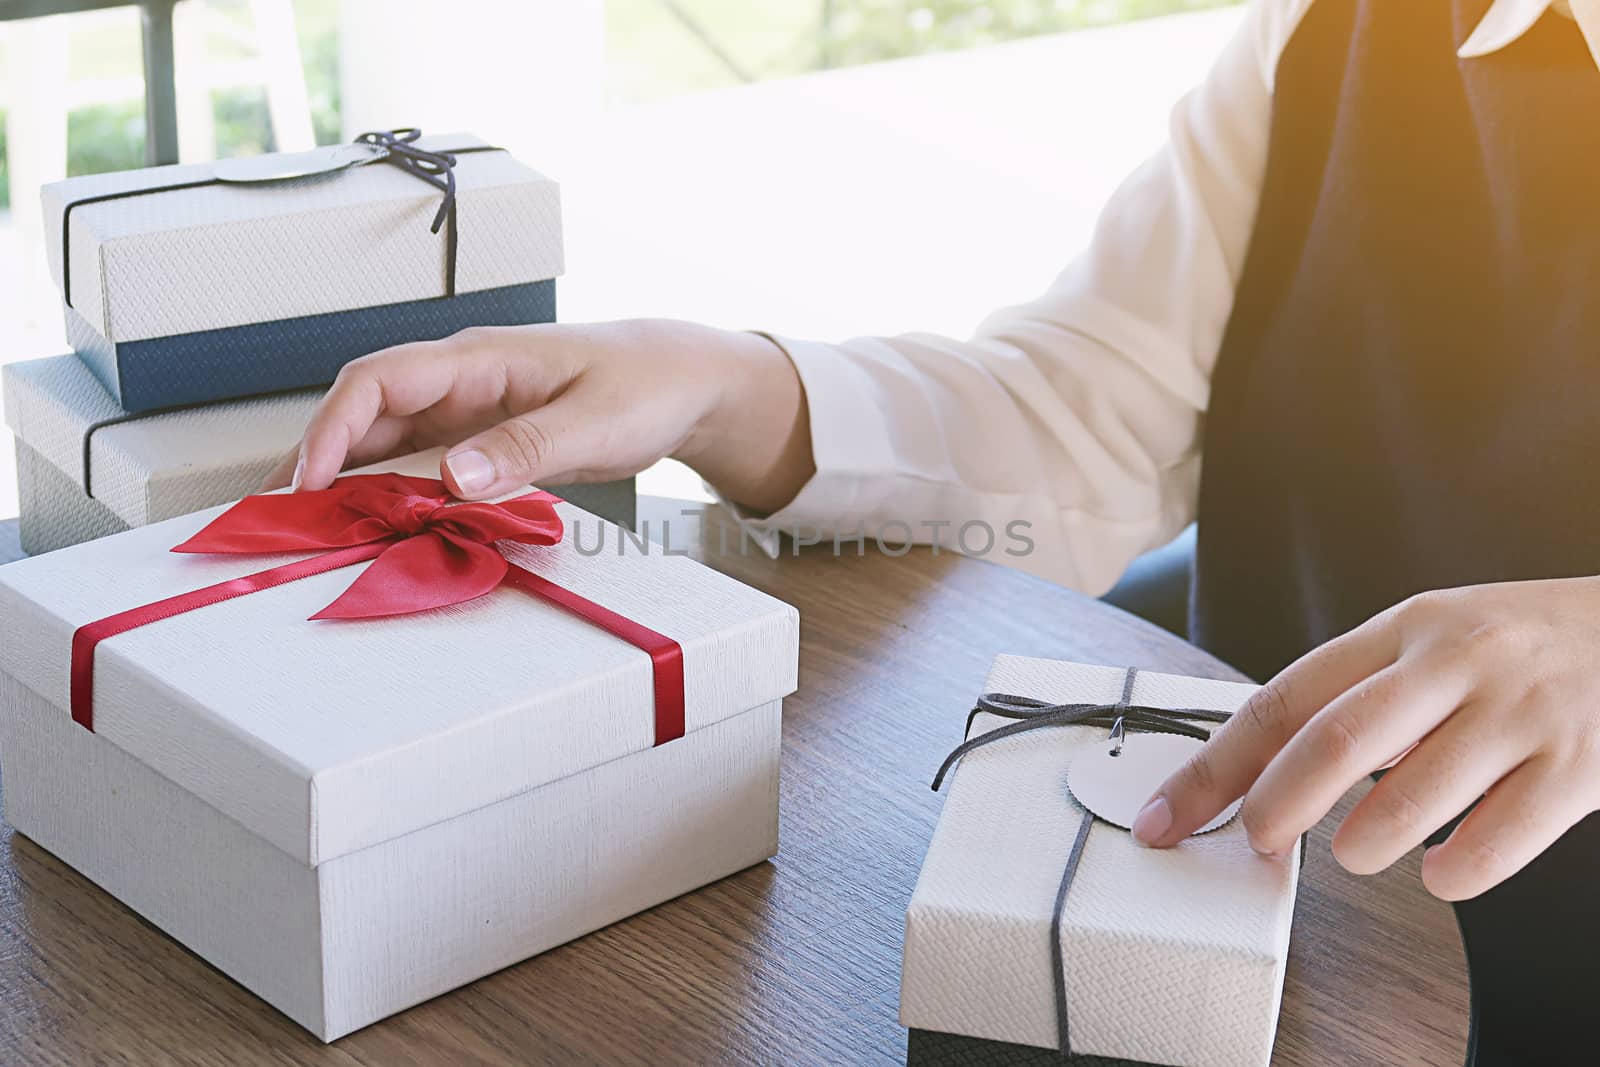 Valentine present. Gift box and red ribbon for romantic couple